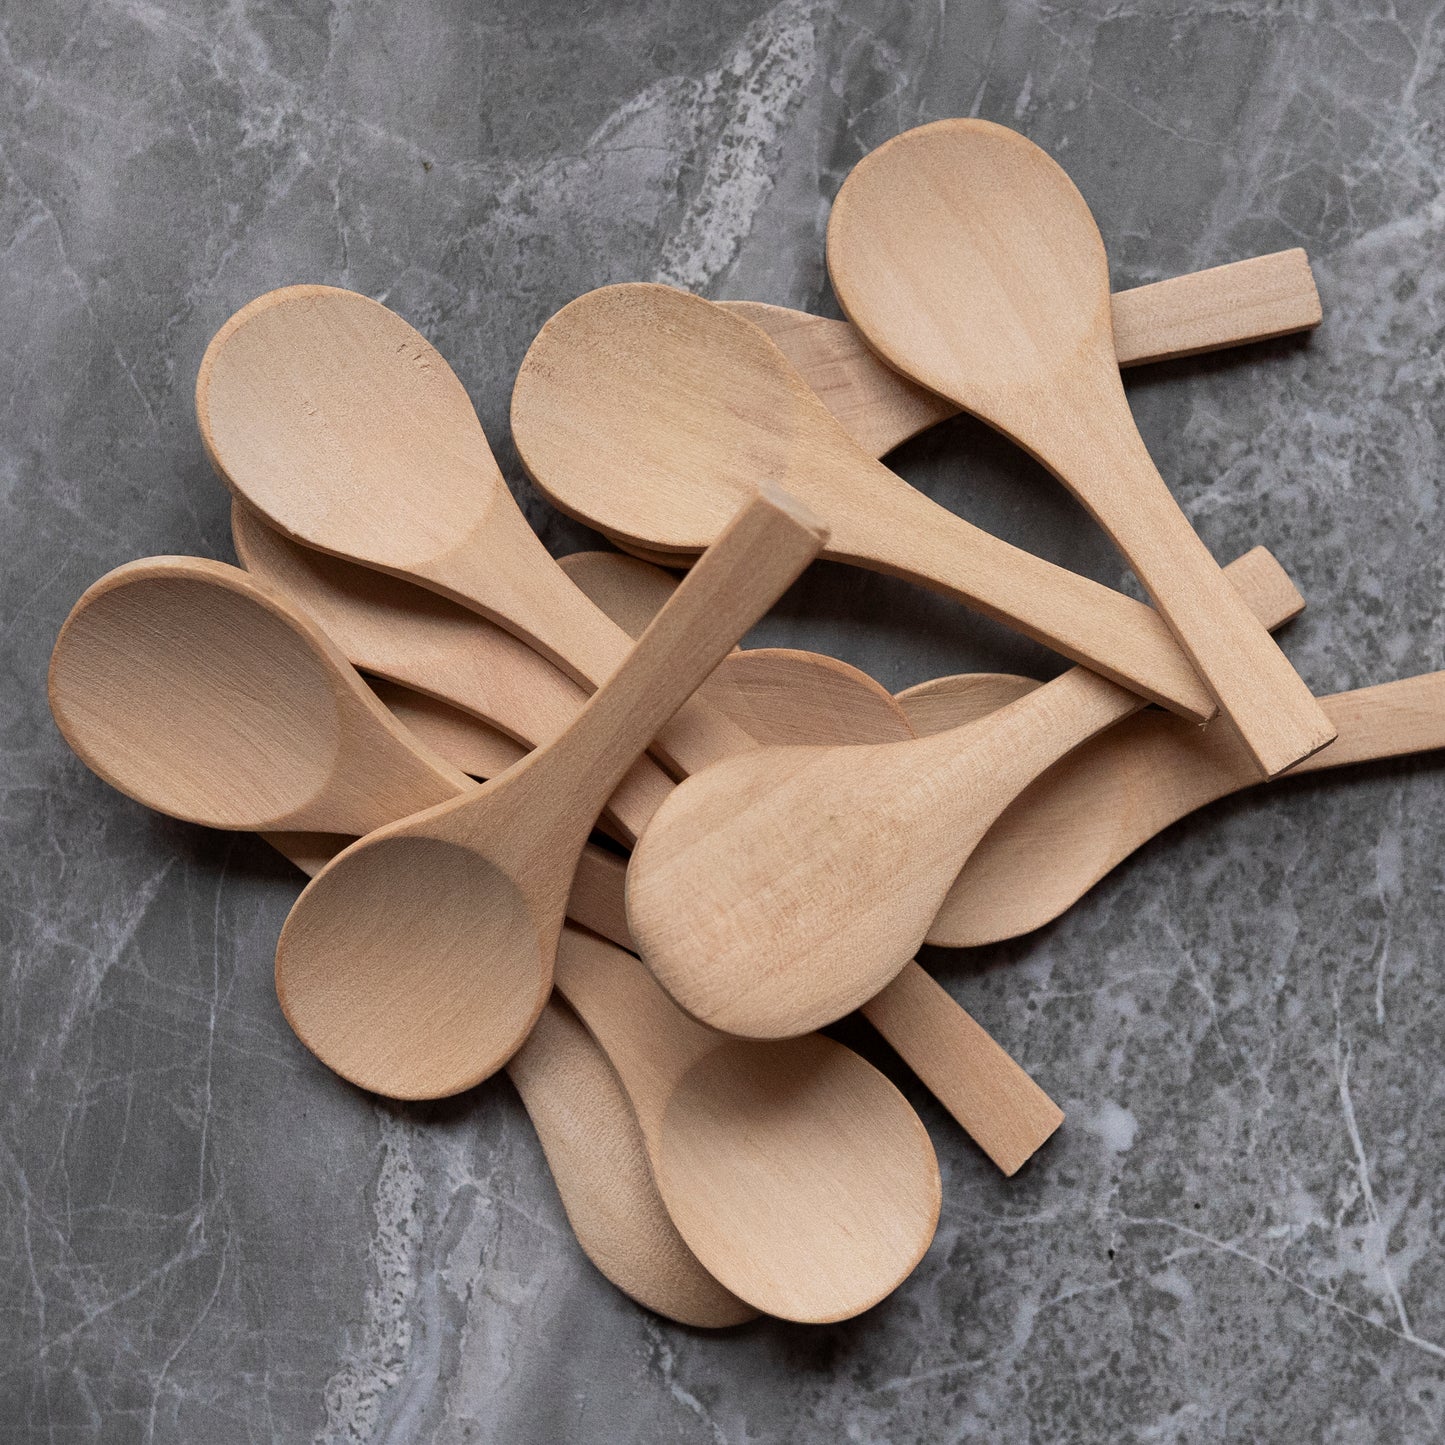 image of a pile of wooden spoons on a marble surface